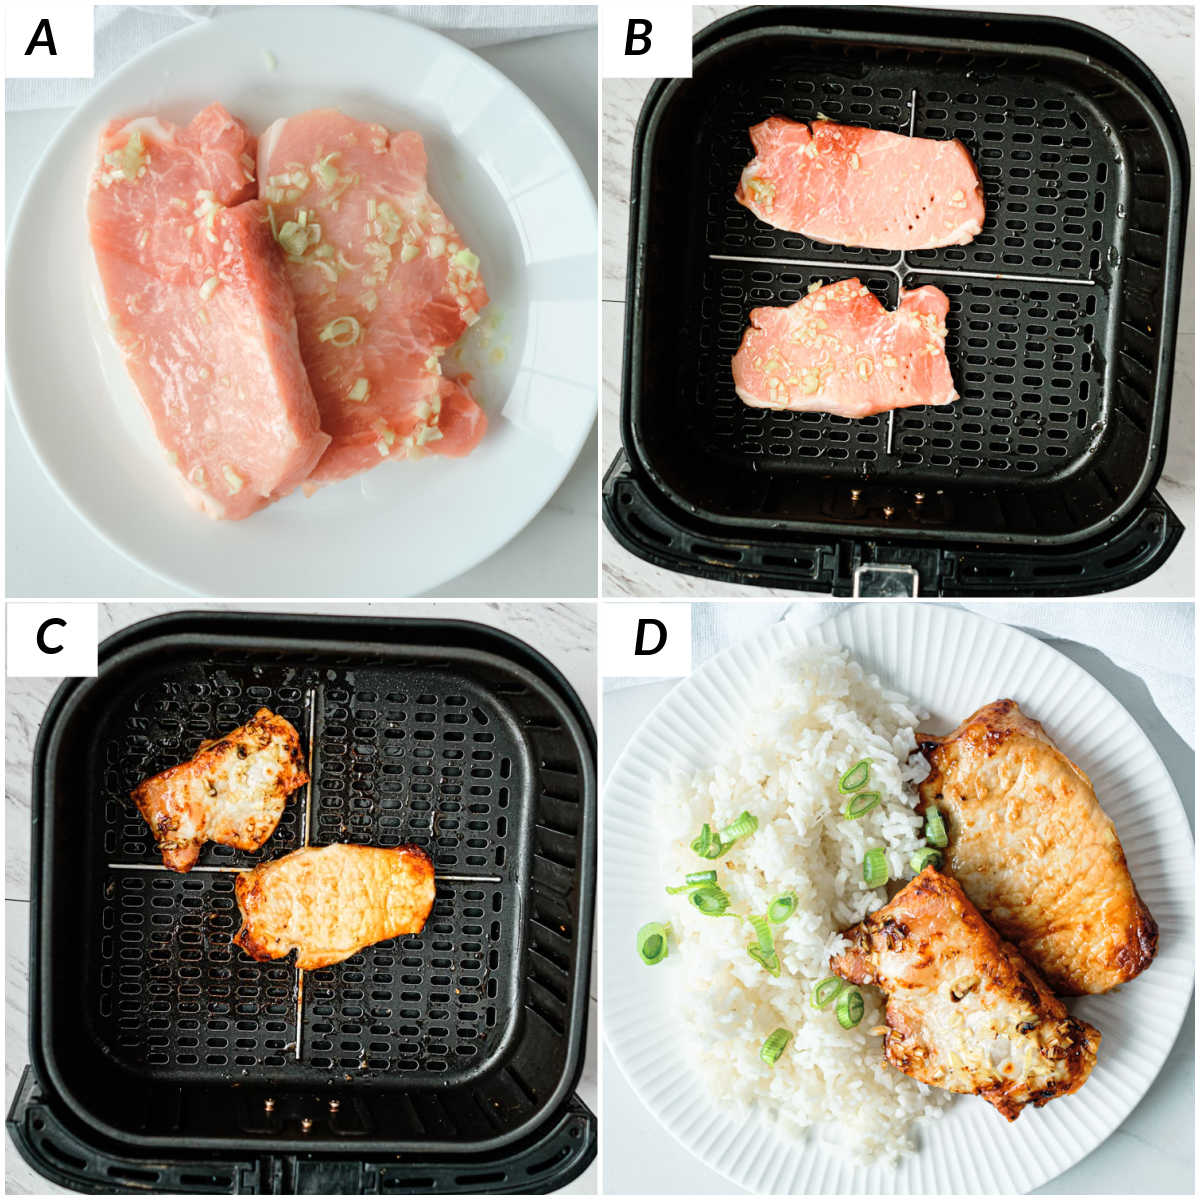 image collage showing the steps for making pork steak in air fryer